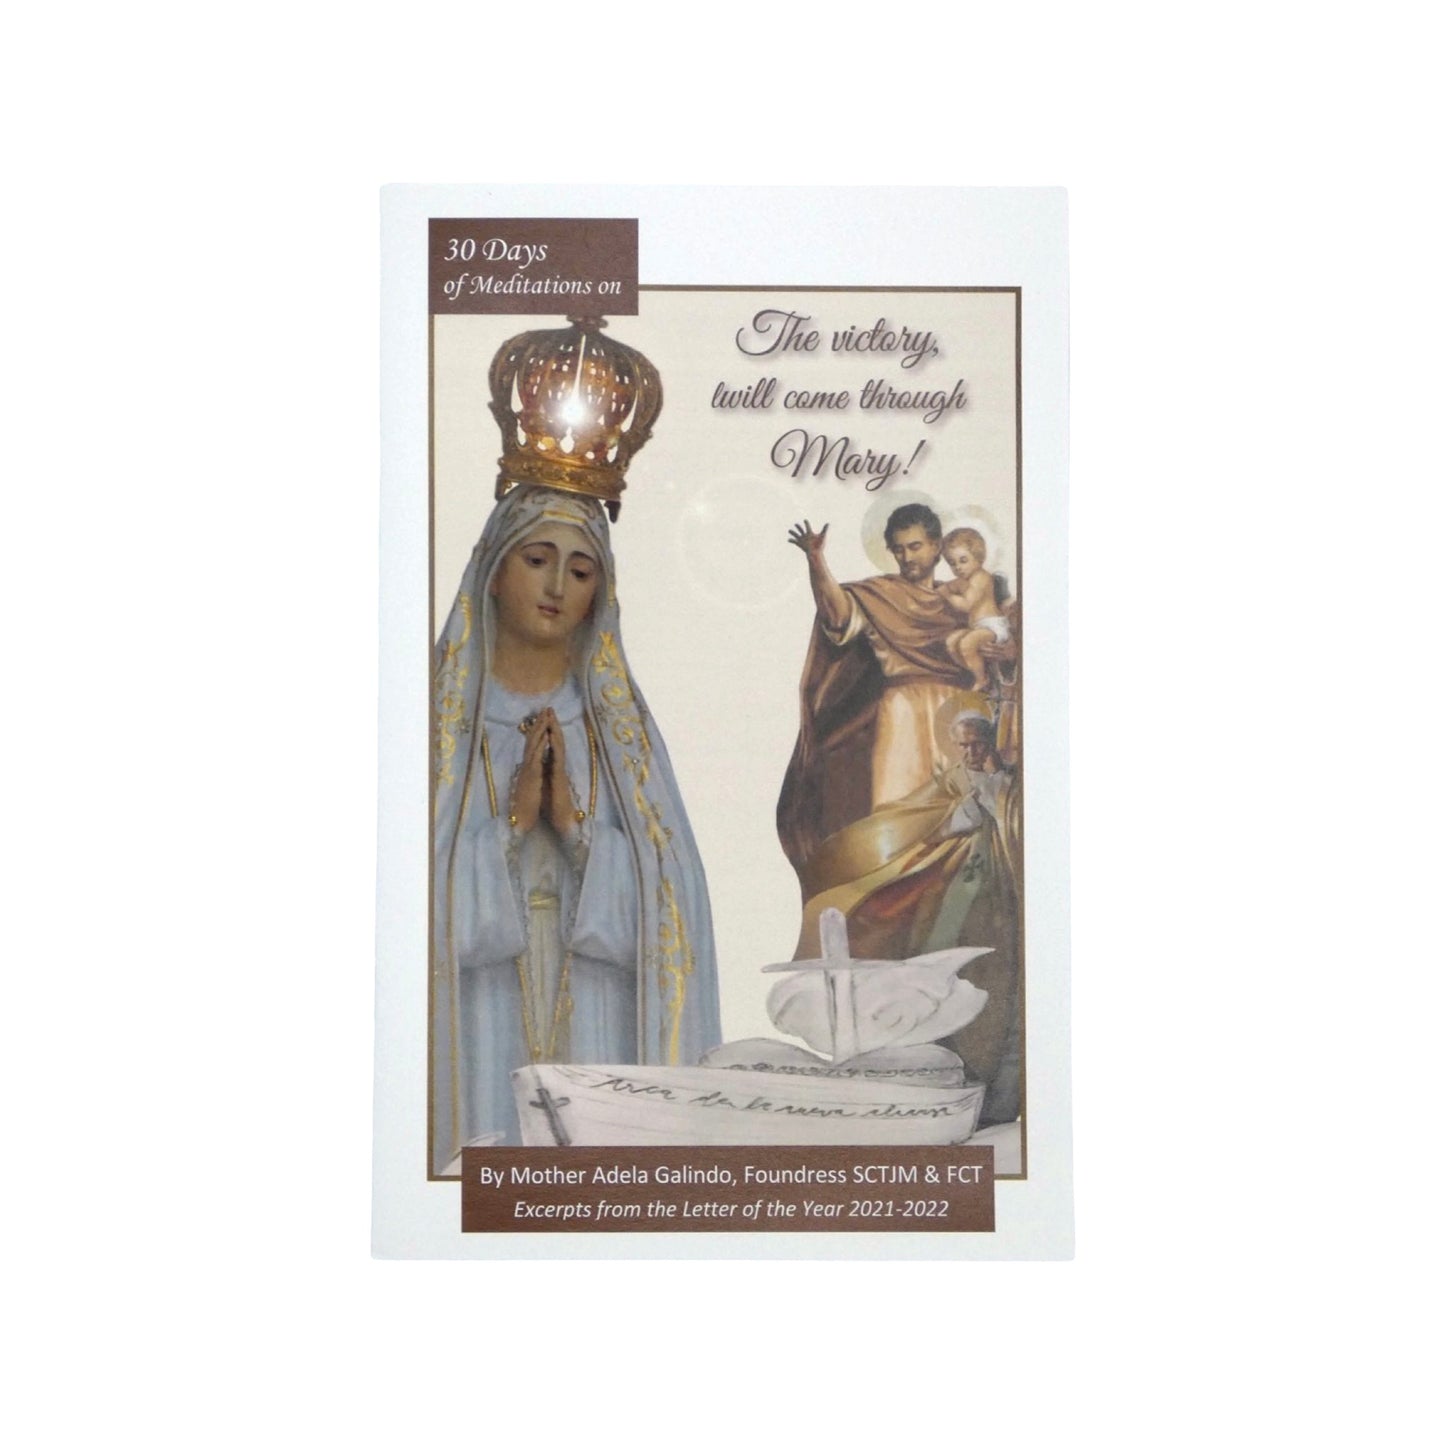 30 Days of Meditations on "The Victory will Come Through Mary" by Mother Adela, SCTJM Foundress